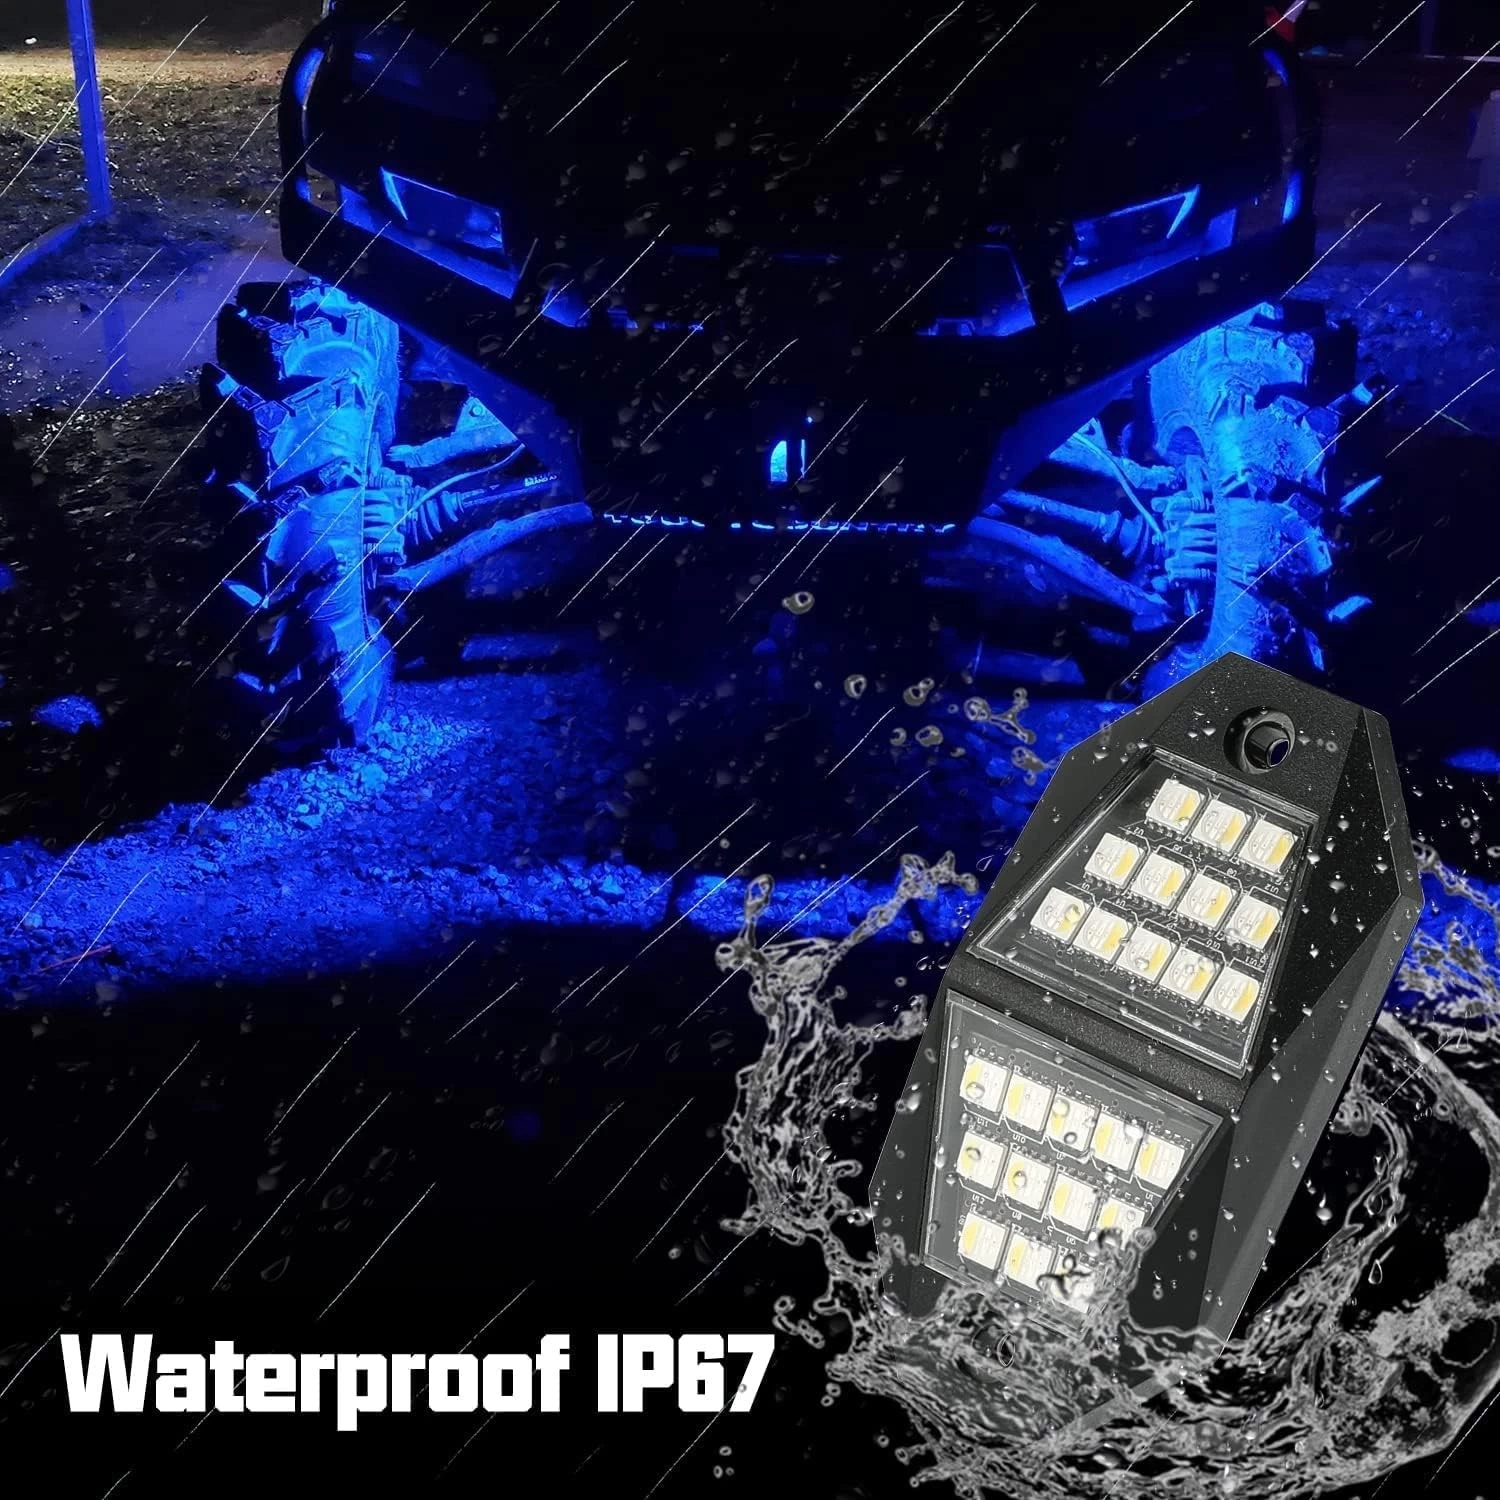 5 Sides LED Rock Lights 8 Pods Multicolor Underglow Lights for Trucks with App Control Flashing Music Mode RGB Rock Lights for Boat SUV Car Accessories - COPY - lf3jlu